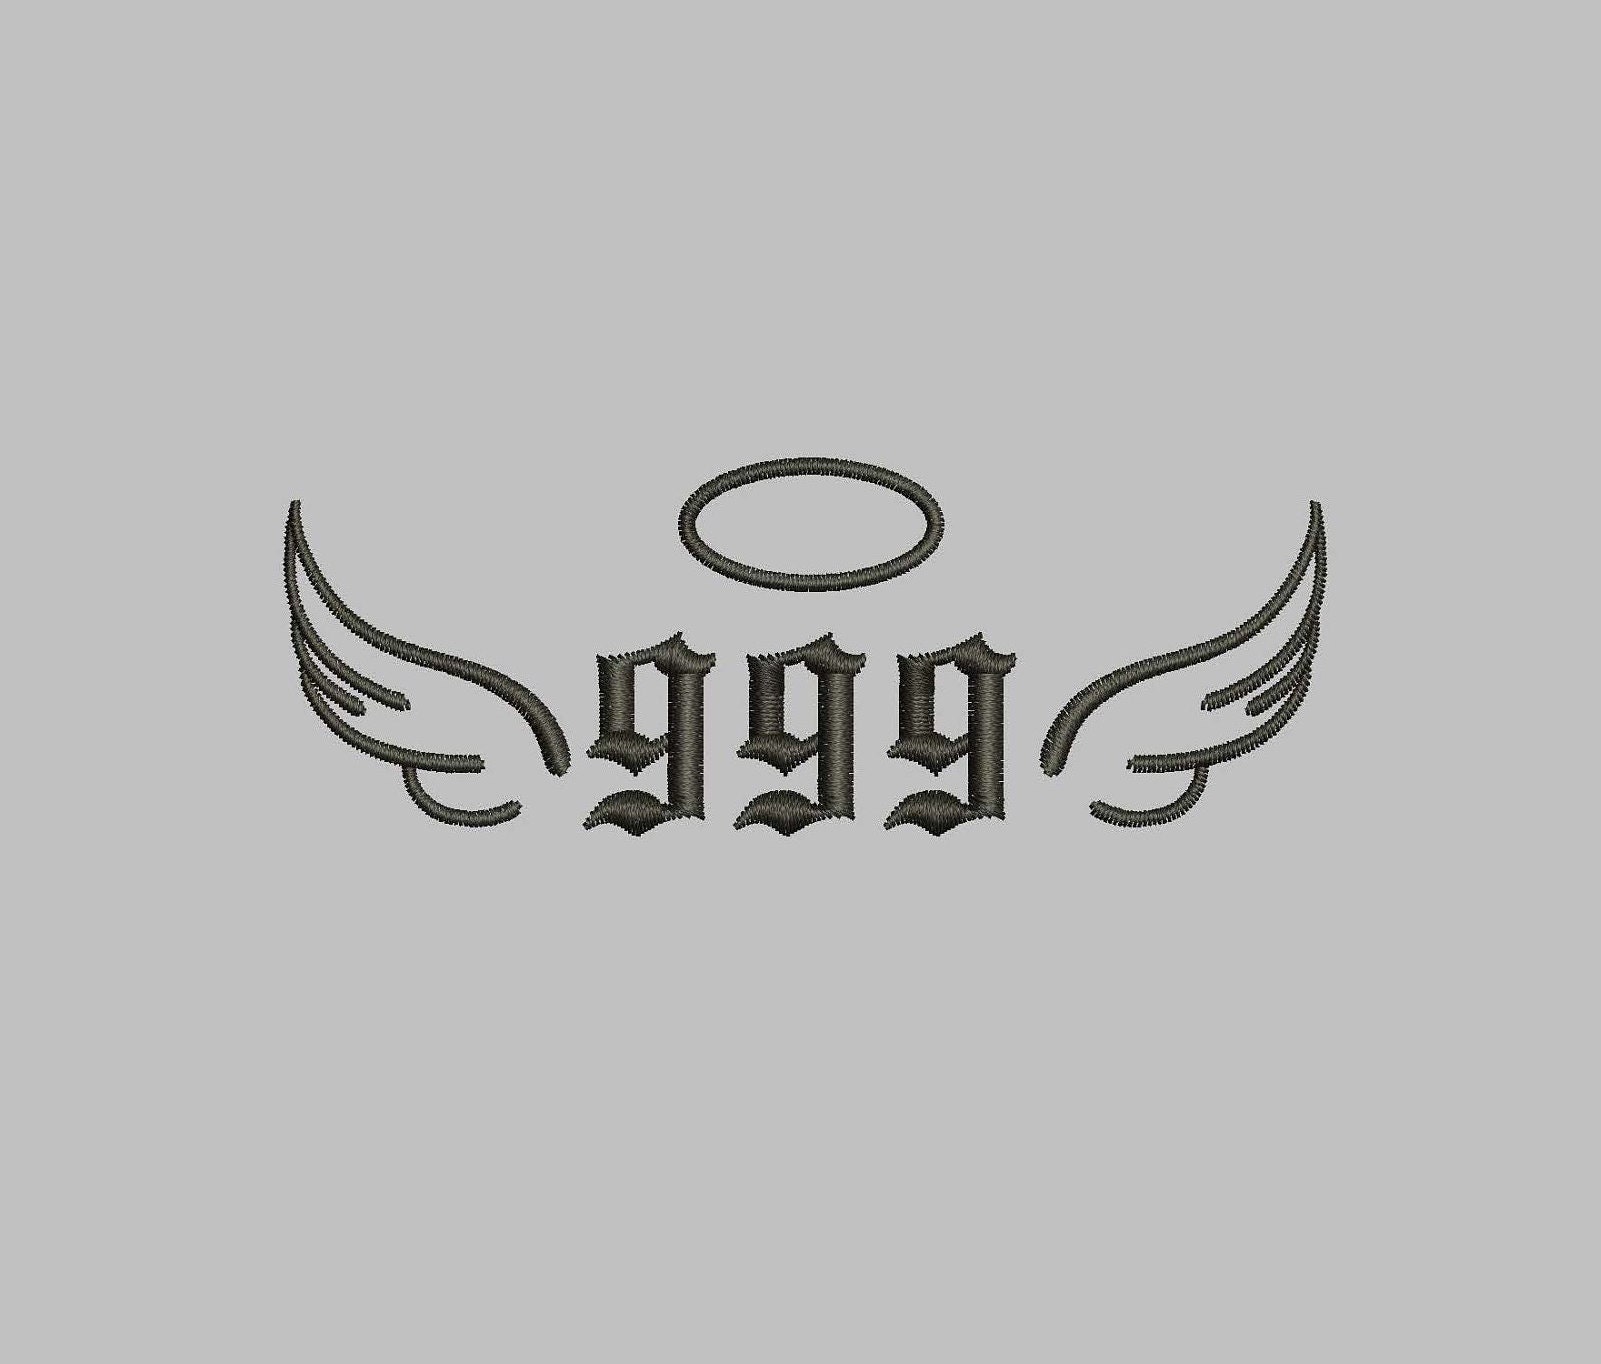 Tattoo of the number 999 placed on the sternum